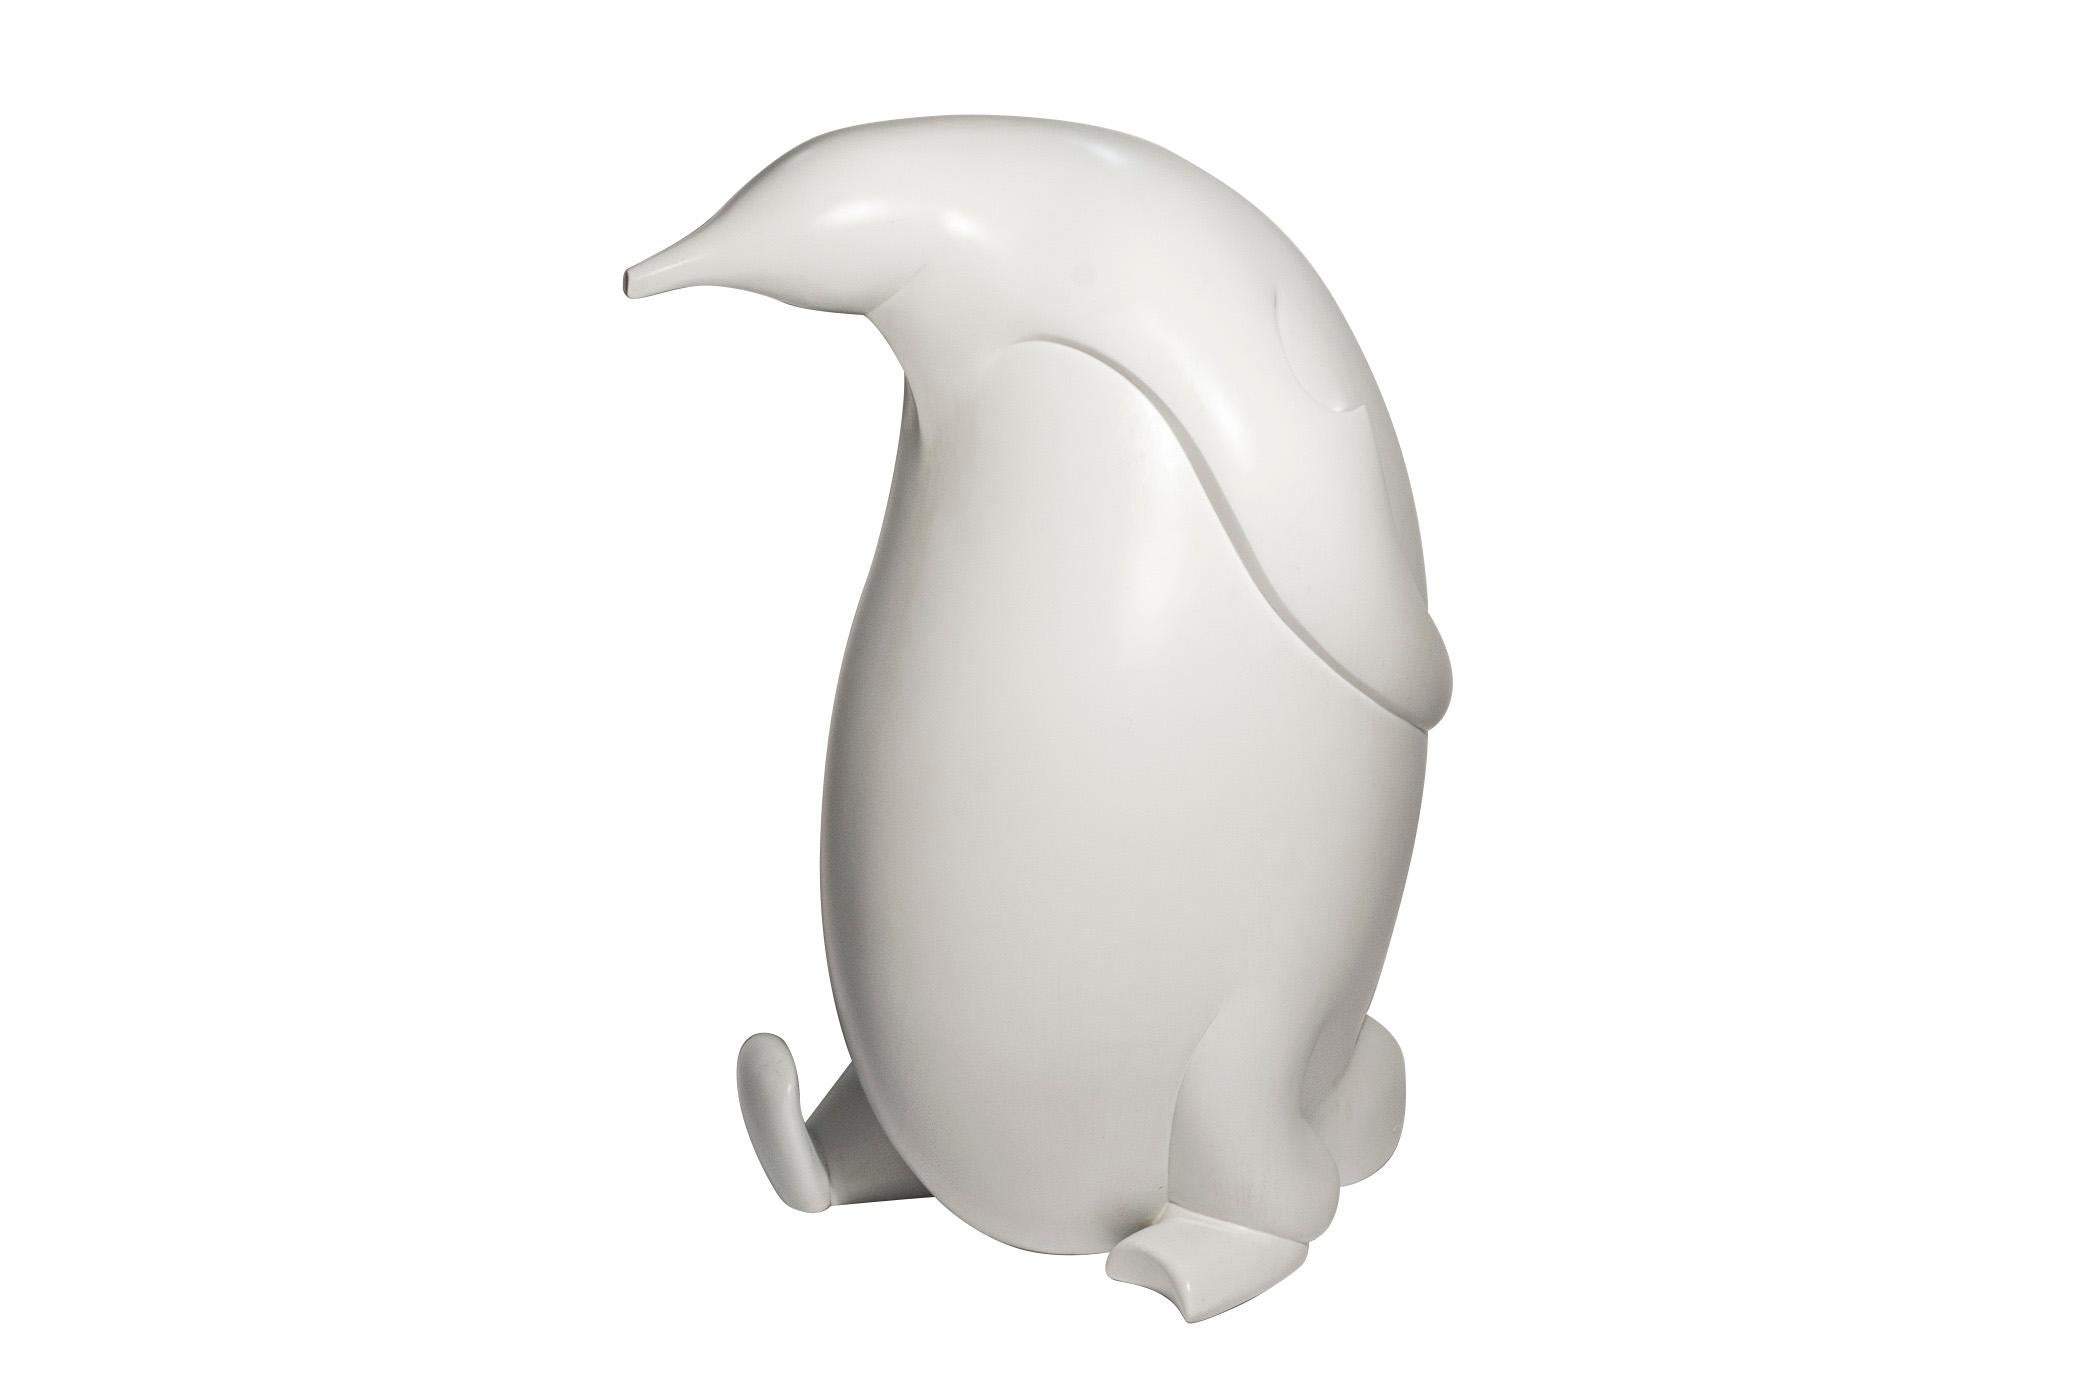 Bernard Conforti,
Important penguin sculpture,
White resin, signed and numbered 7/8,
France, circa 2018.

Measures: Height 1m20, width 60 cm, depth 80 cm.